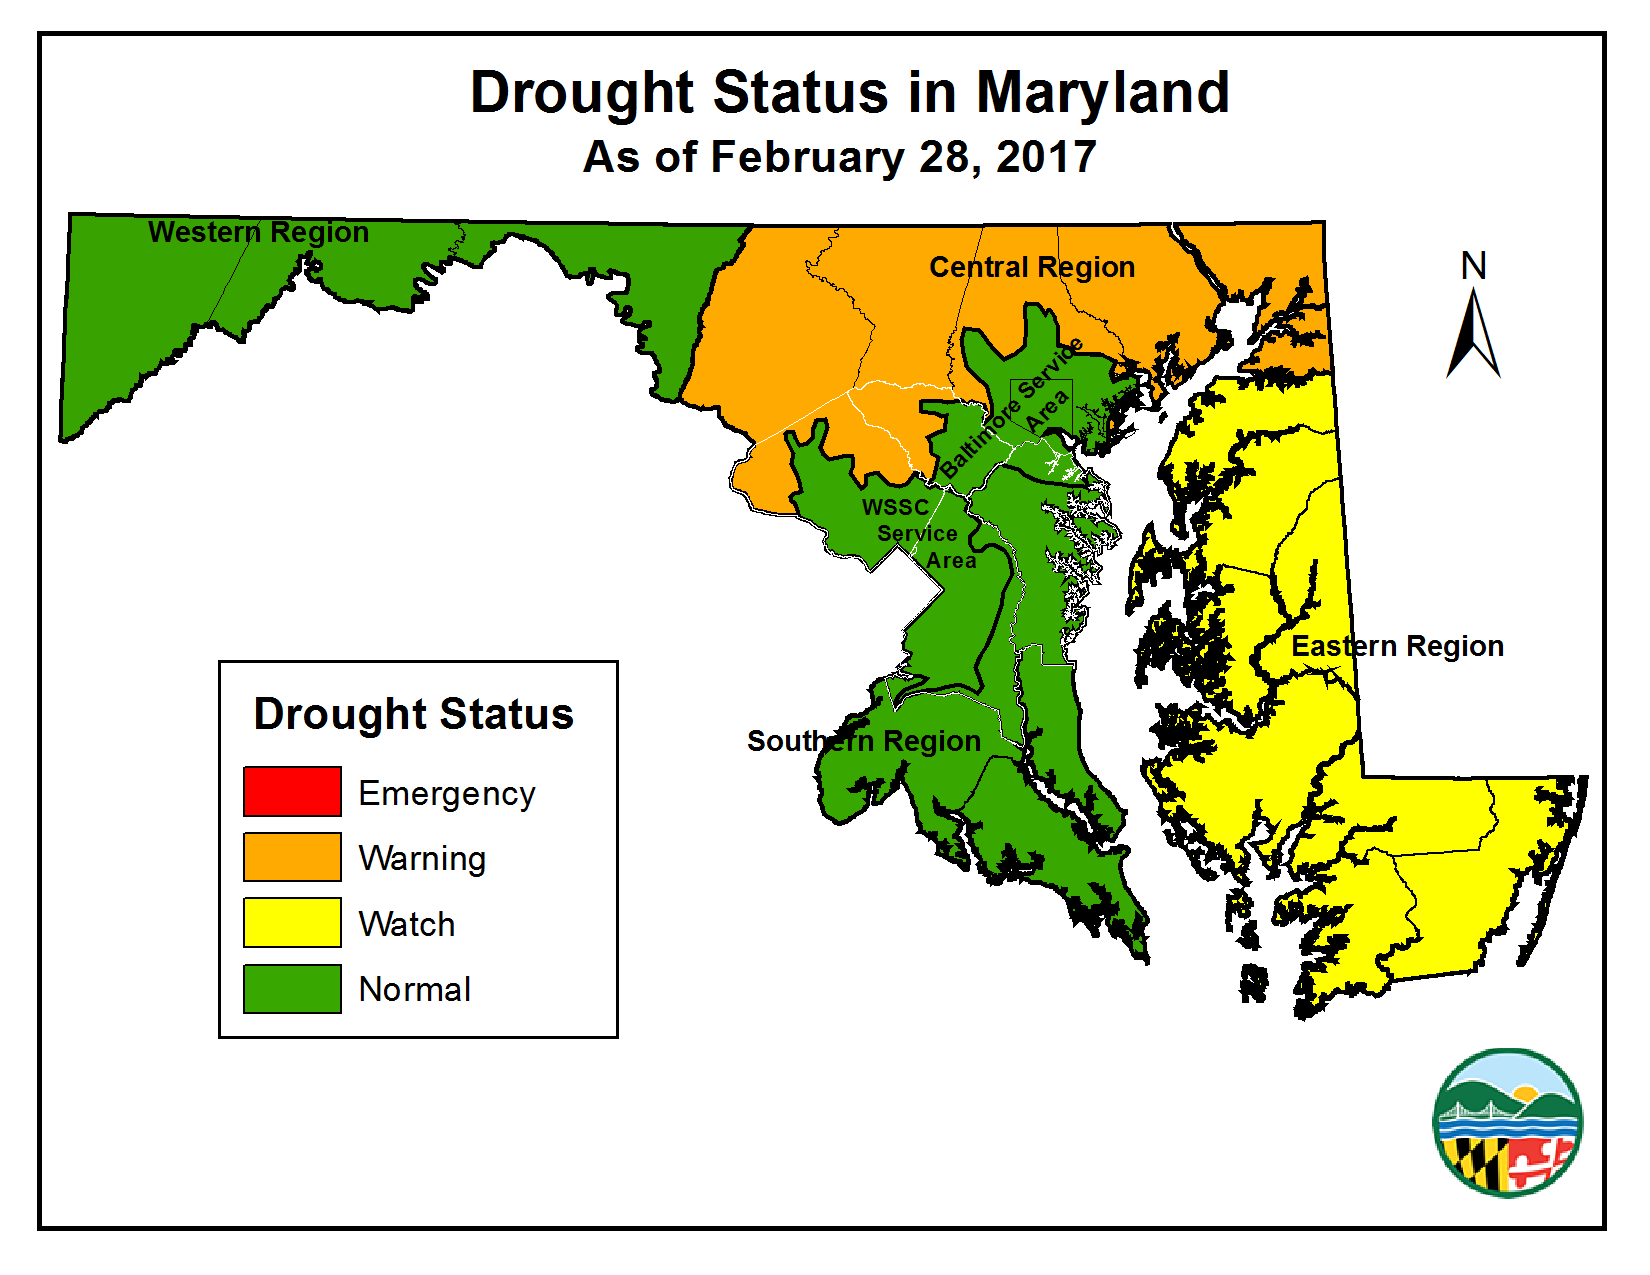 Drought Status as of February 28, 2017